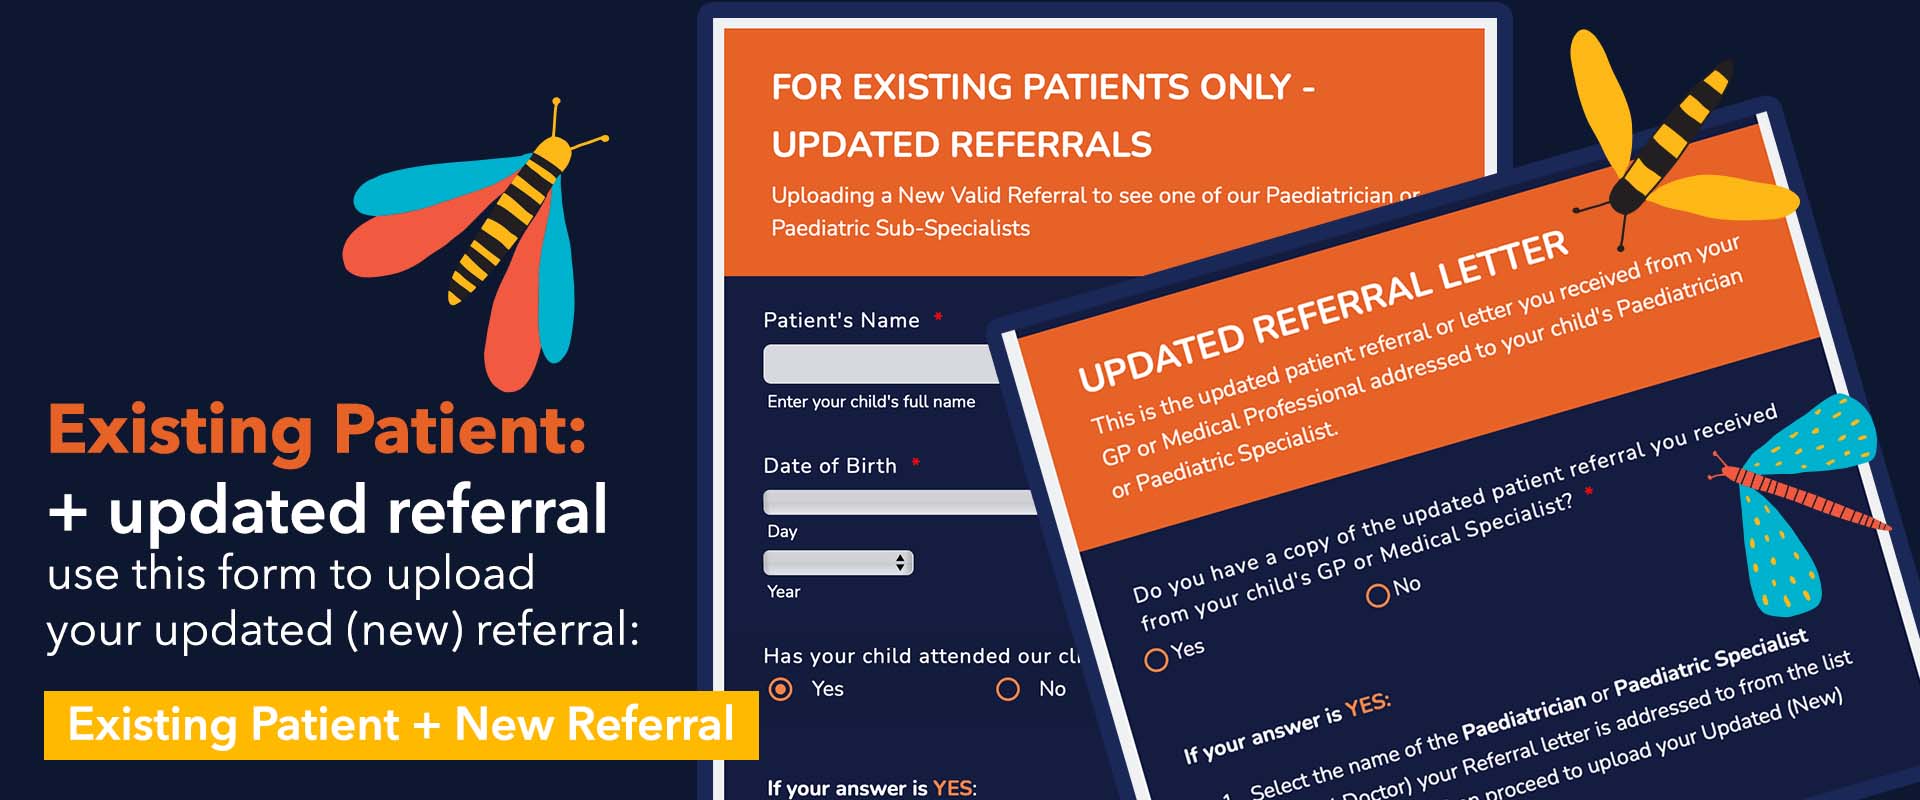 Existing Patient - Update Referral Letter